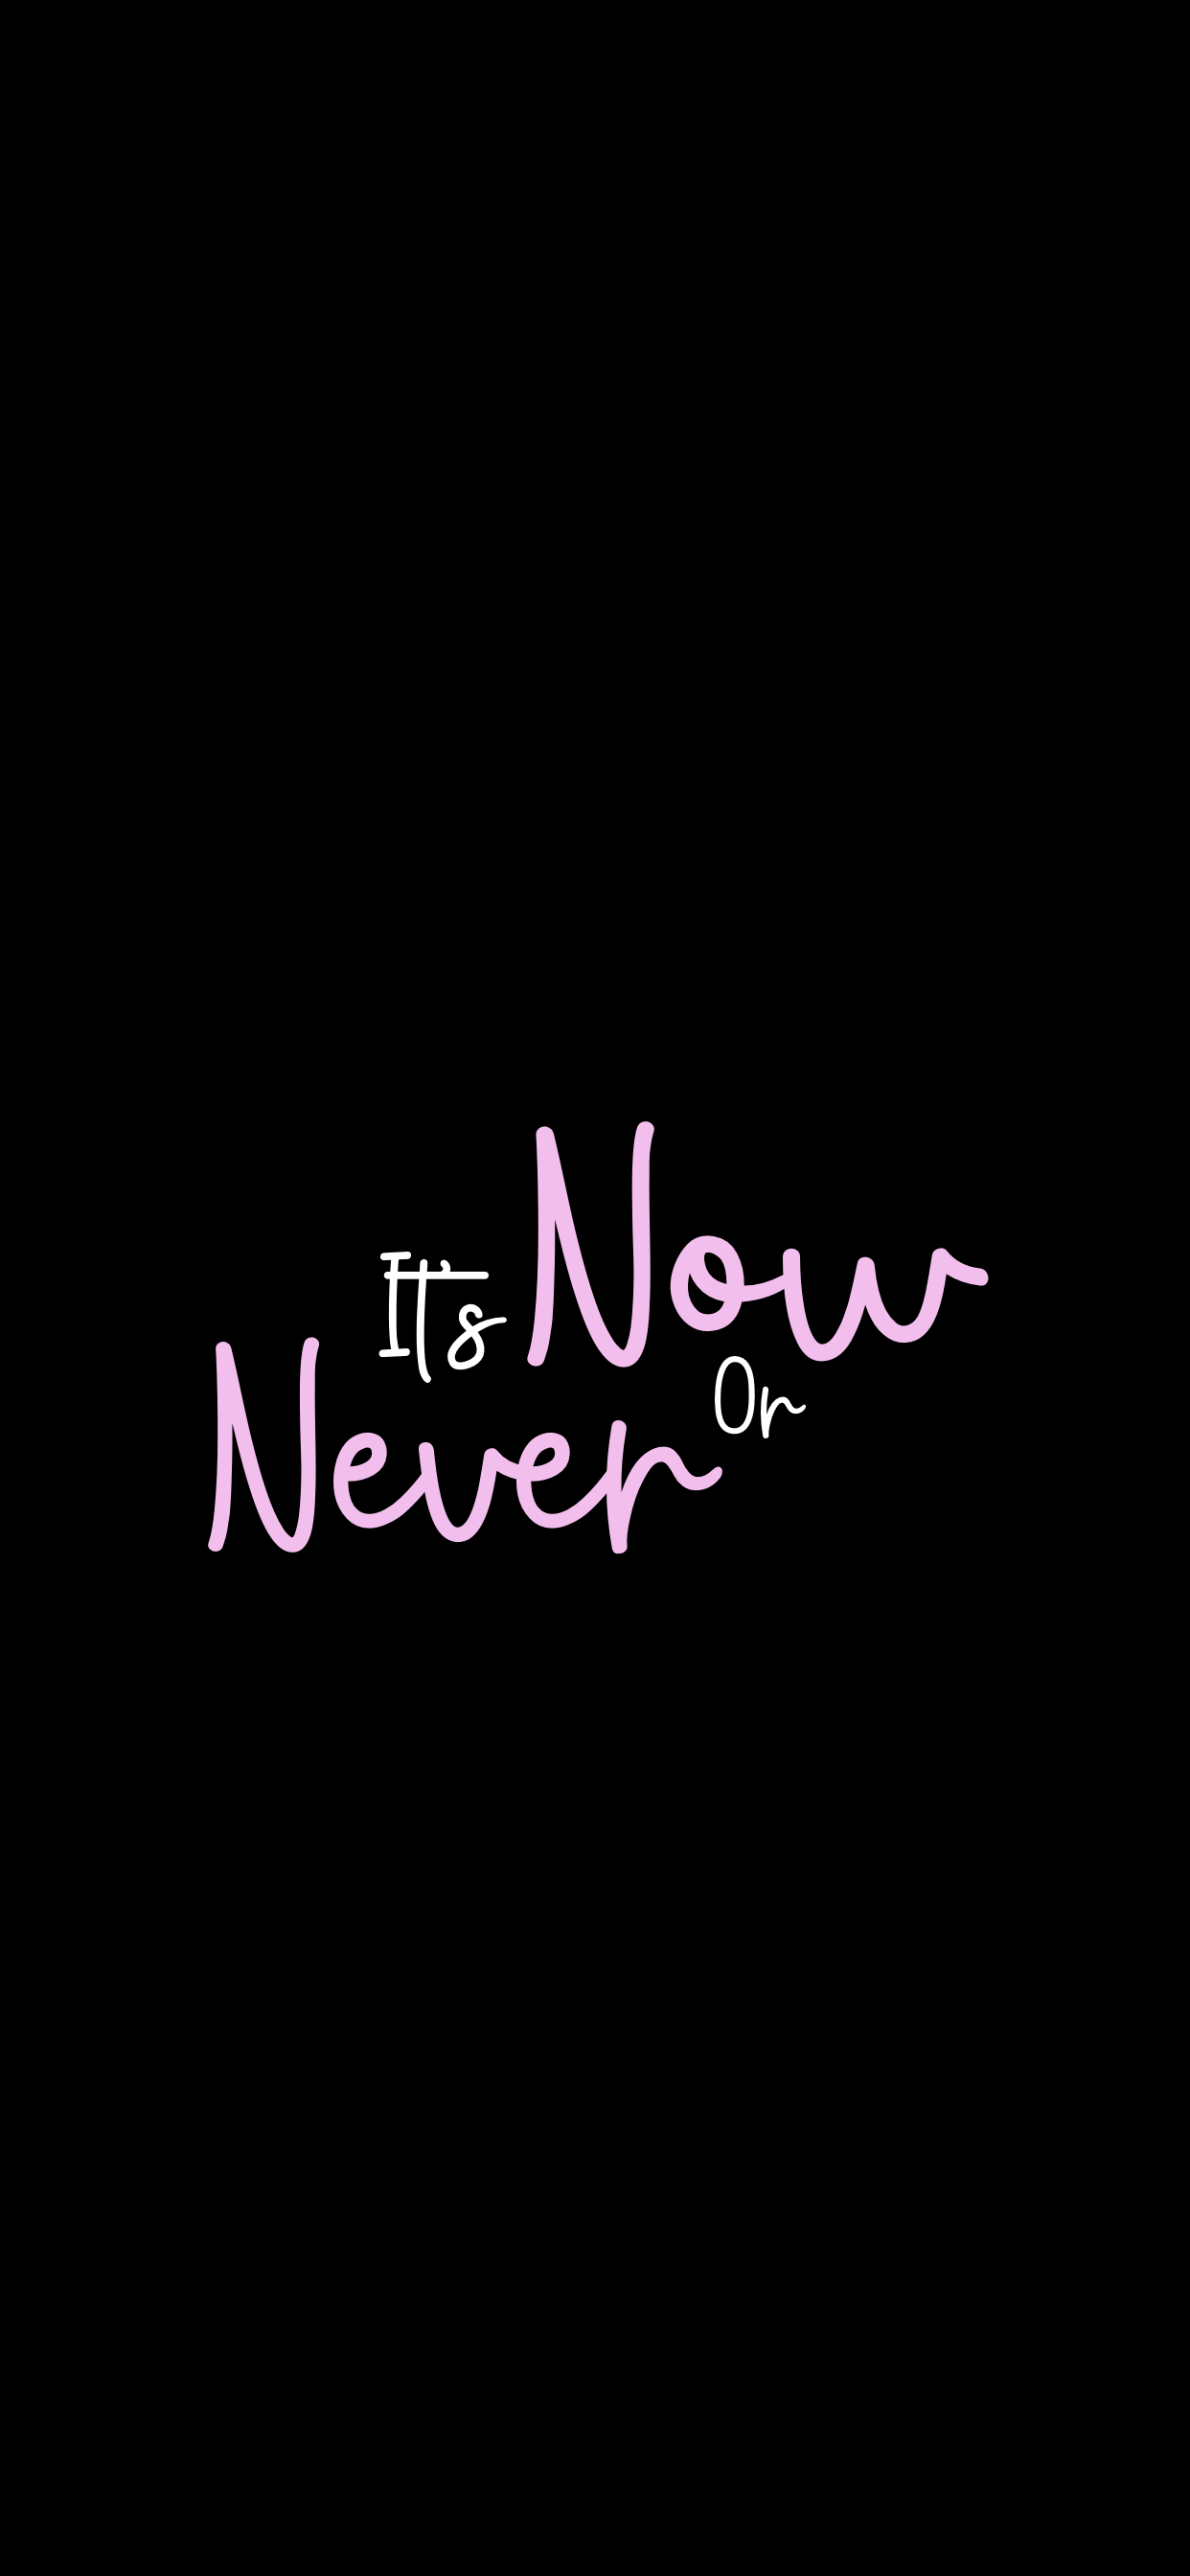 Now Or Never Wallpaper Free Now Or Never Background